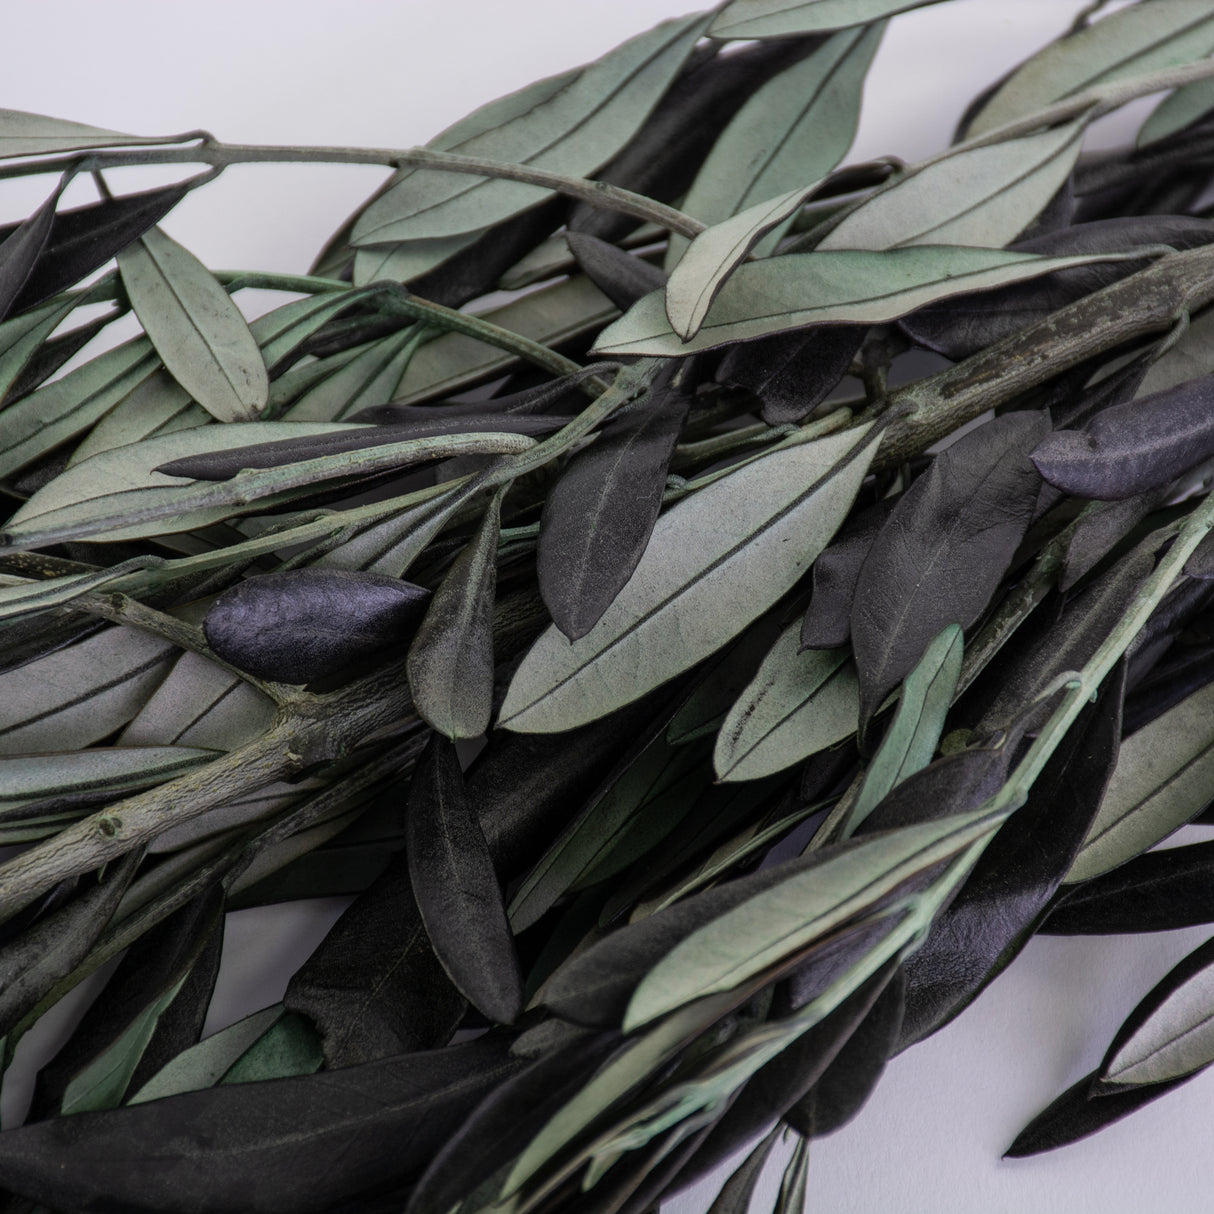 This image shows a bunch of preserved green olive branches against a white background